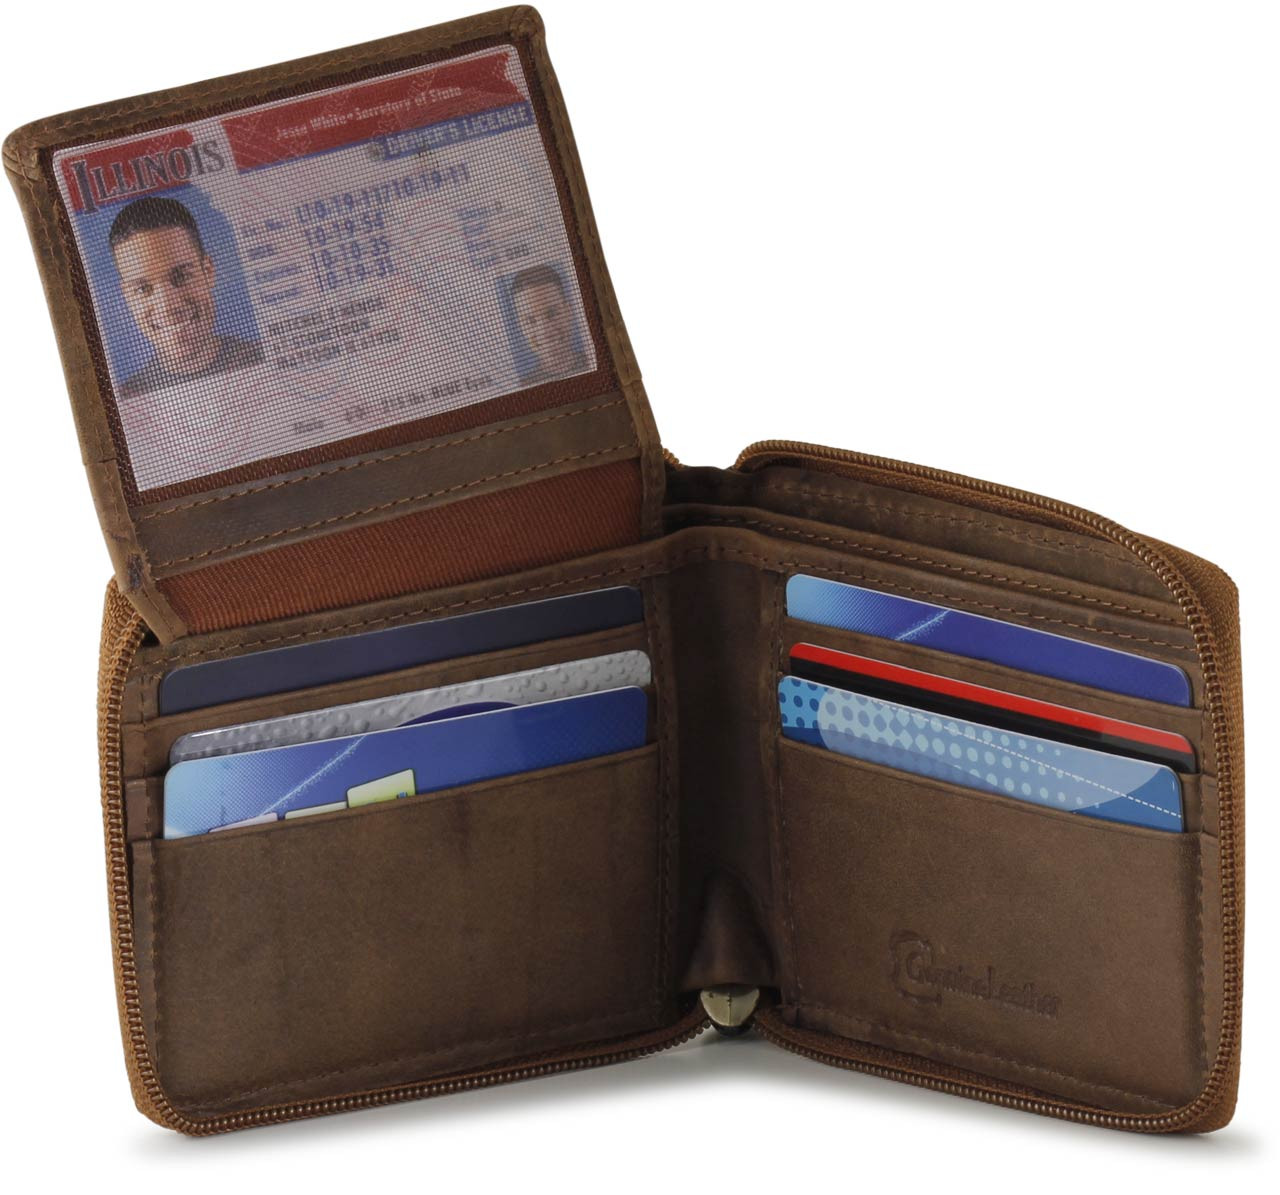 2021 Lowest Price] Police Metal Bi-fold Coin Wallet Stylish Genuine Leather  Wallets For Men Latest Gents Purse With Money Coin And Card Holder  Compartment - Brown (pt168489_1-2) Price in India & Specifications